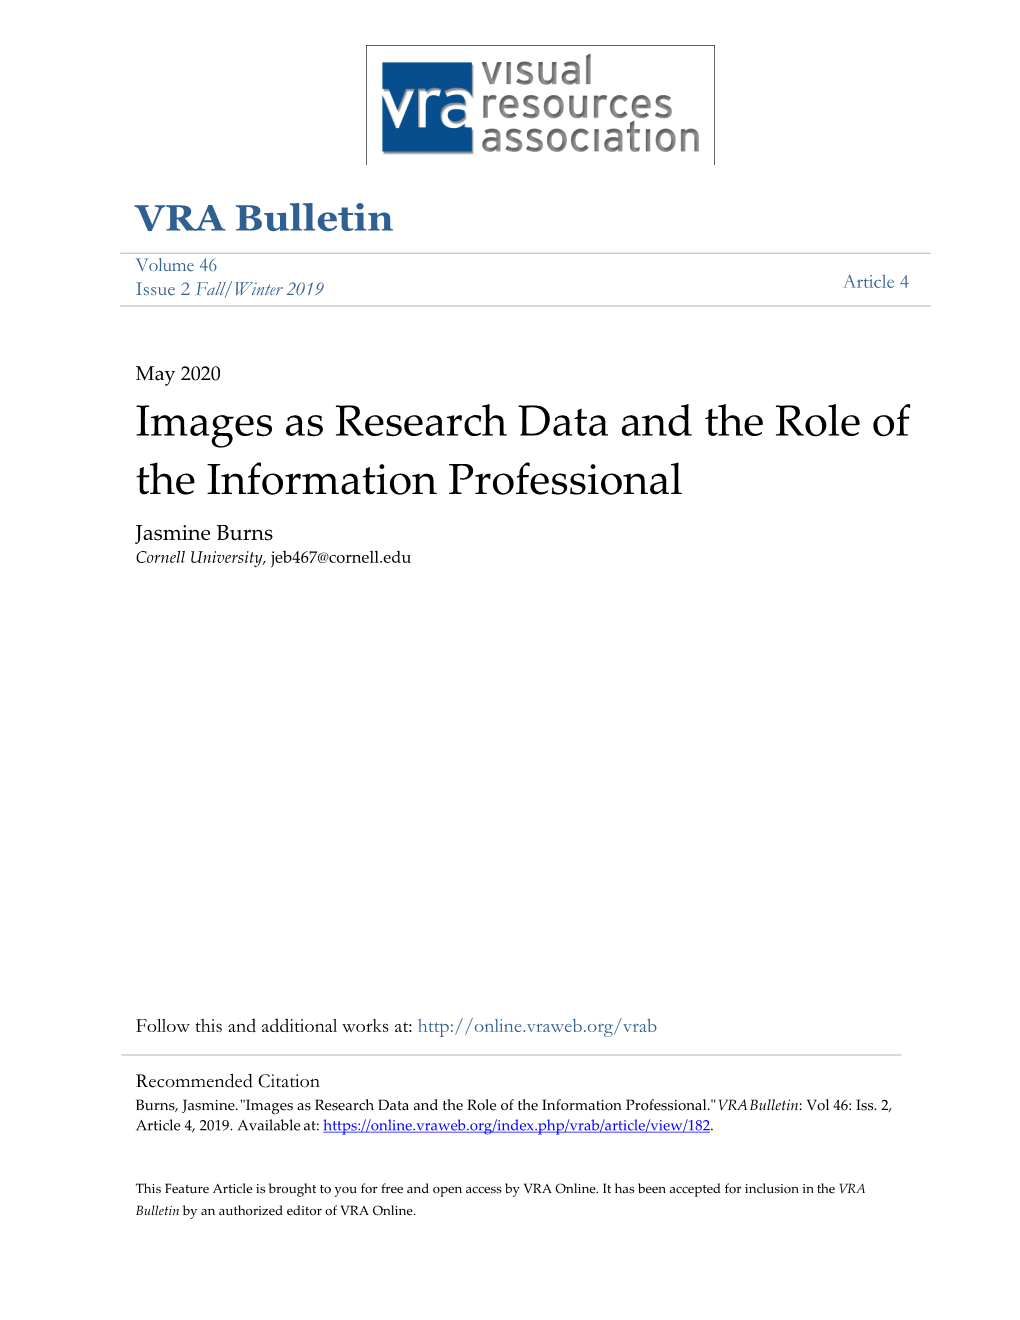 Images As Research Data and the Role of the Information Professional Jasmine Burns Cornell University, Jeb467@Cornell.Edu